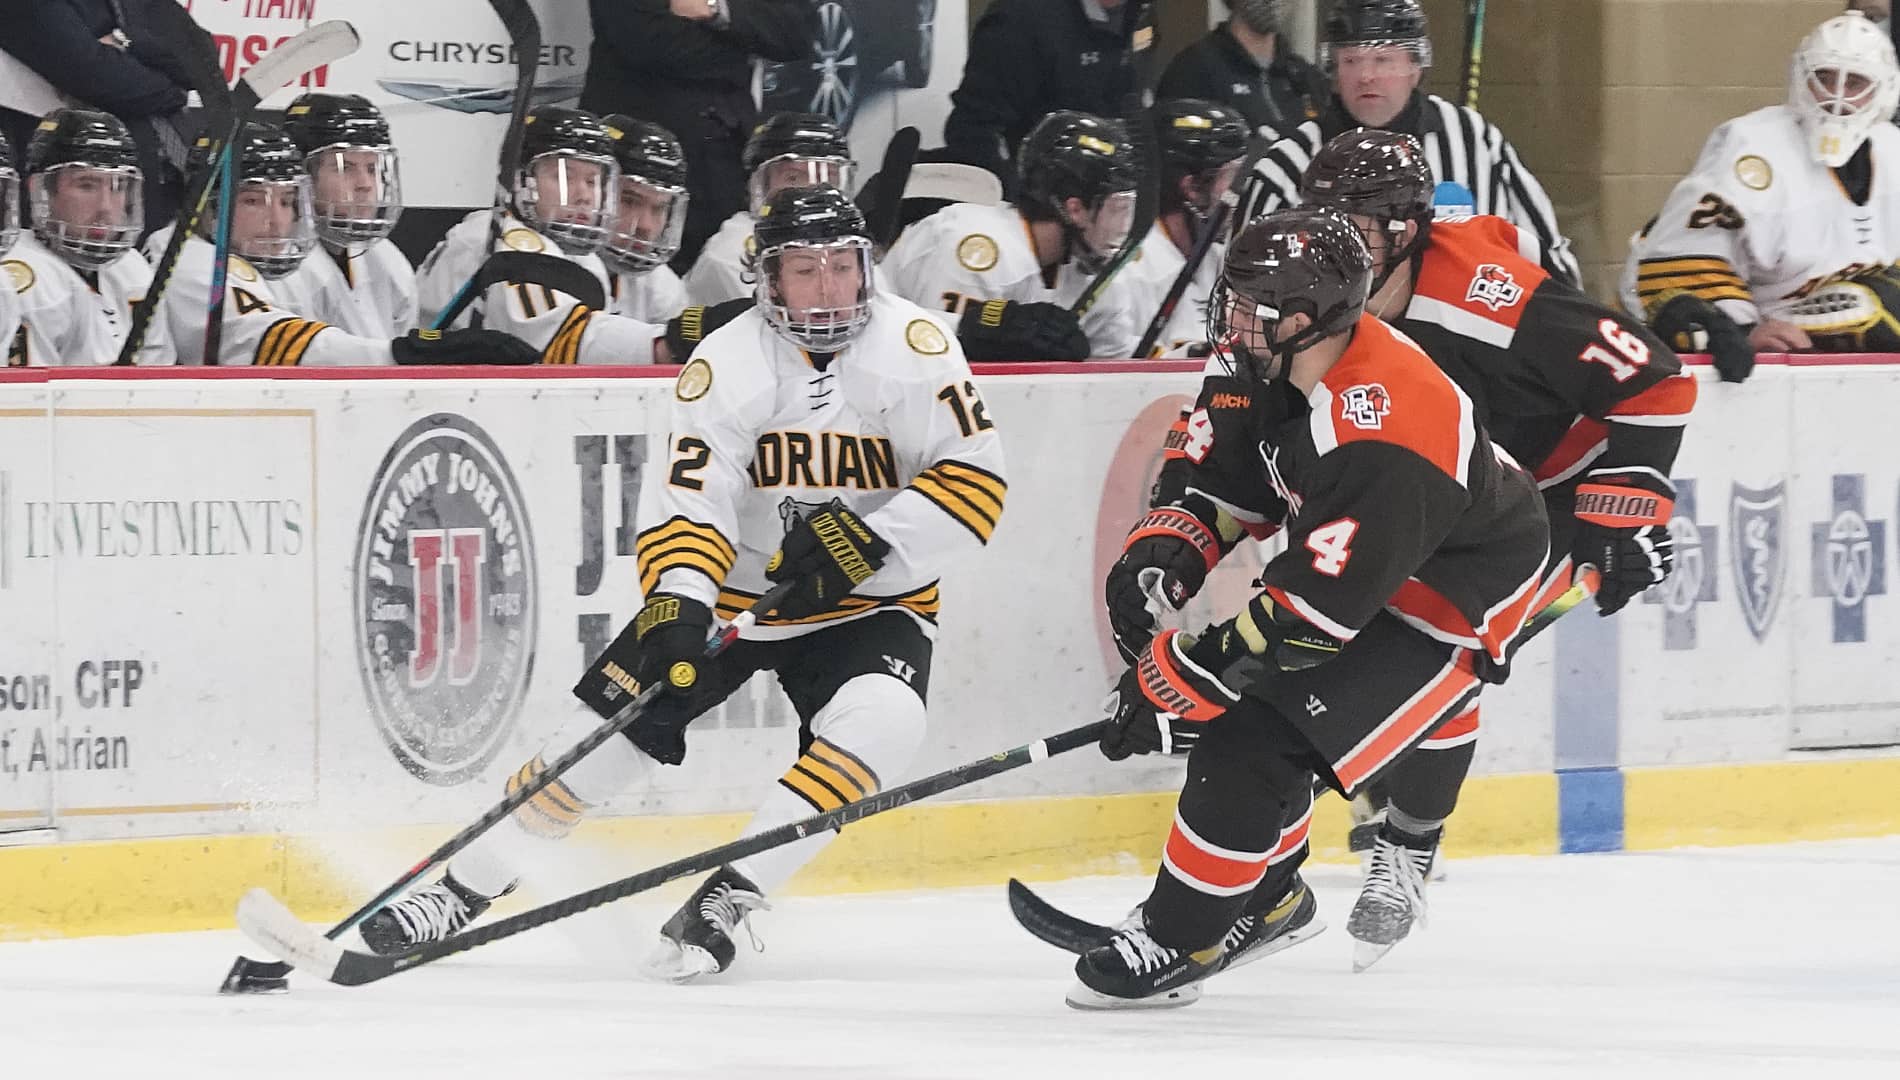 Adrian College Men's Hockey Team to Host Second Ever D1 Opponent this  Weekend